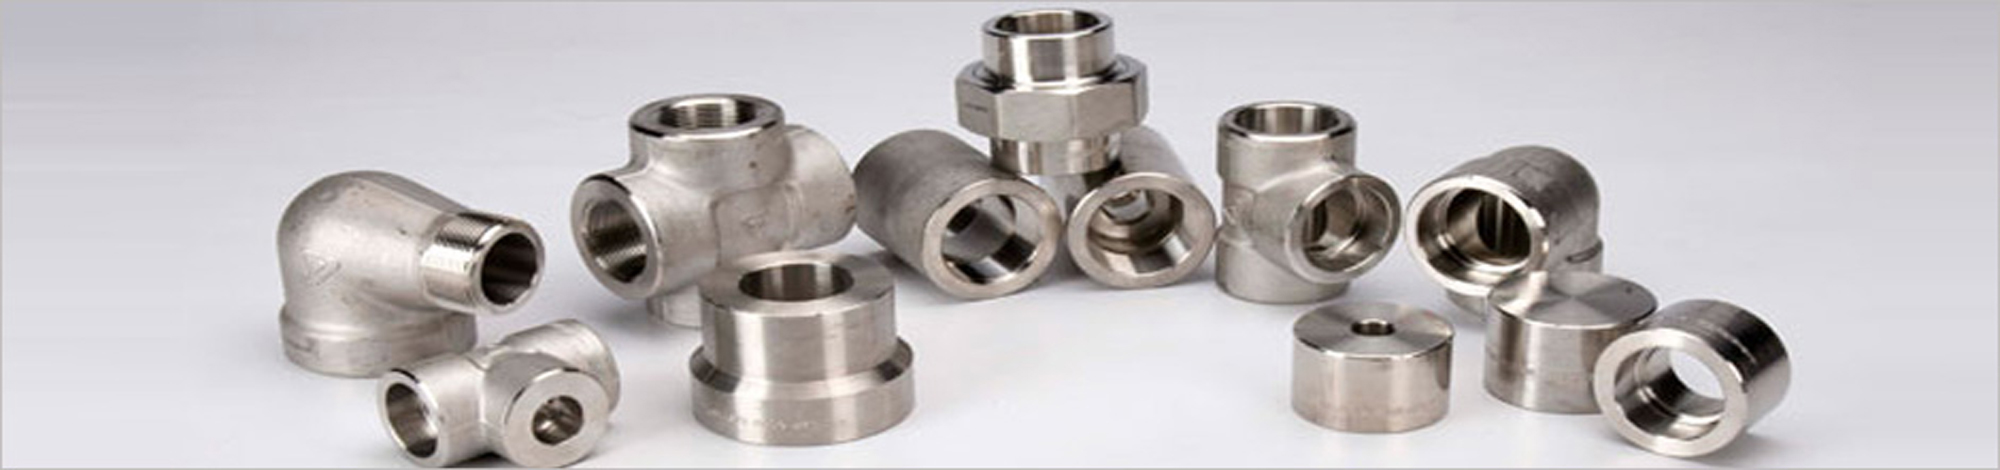 Monel K500 Outlet Fittings supplier